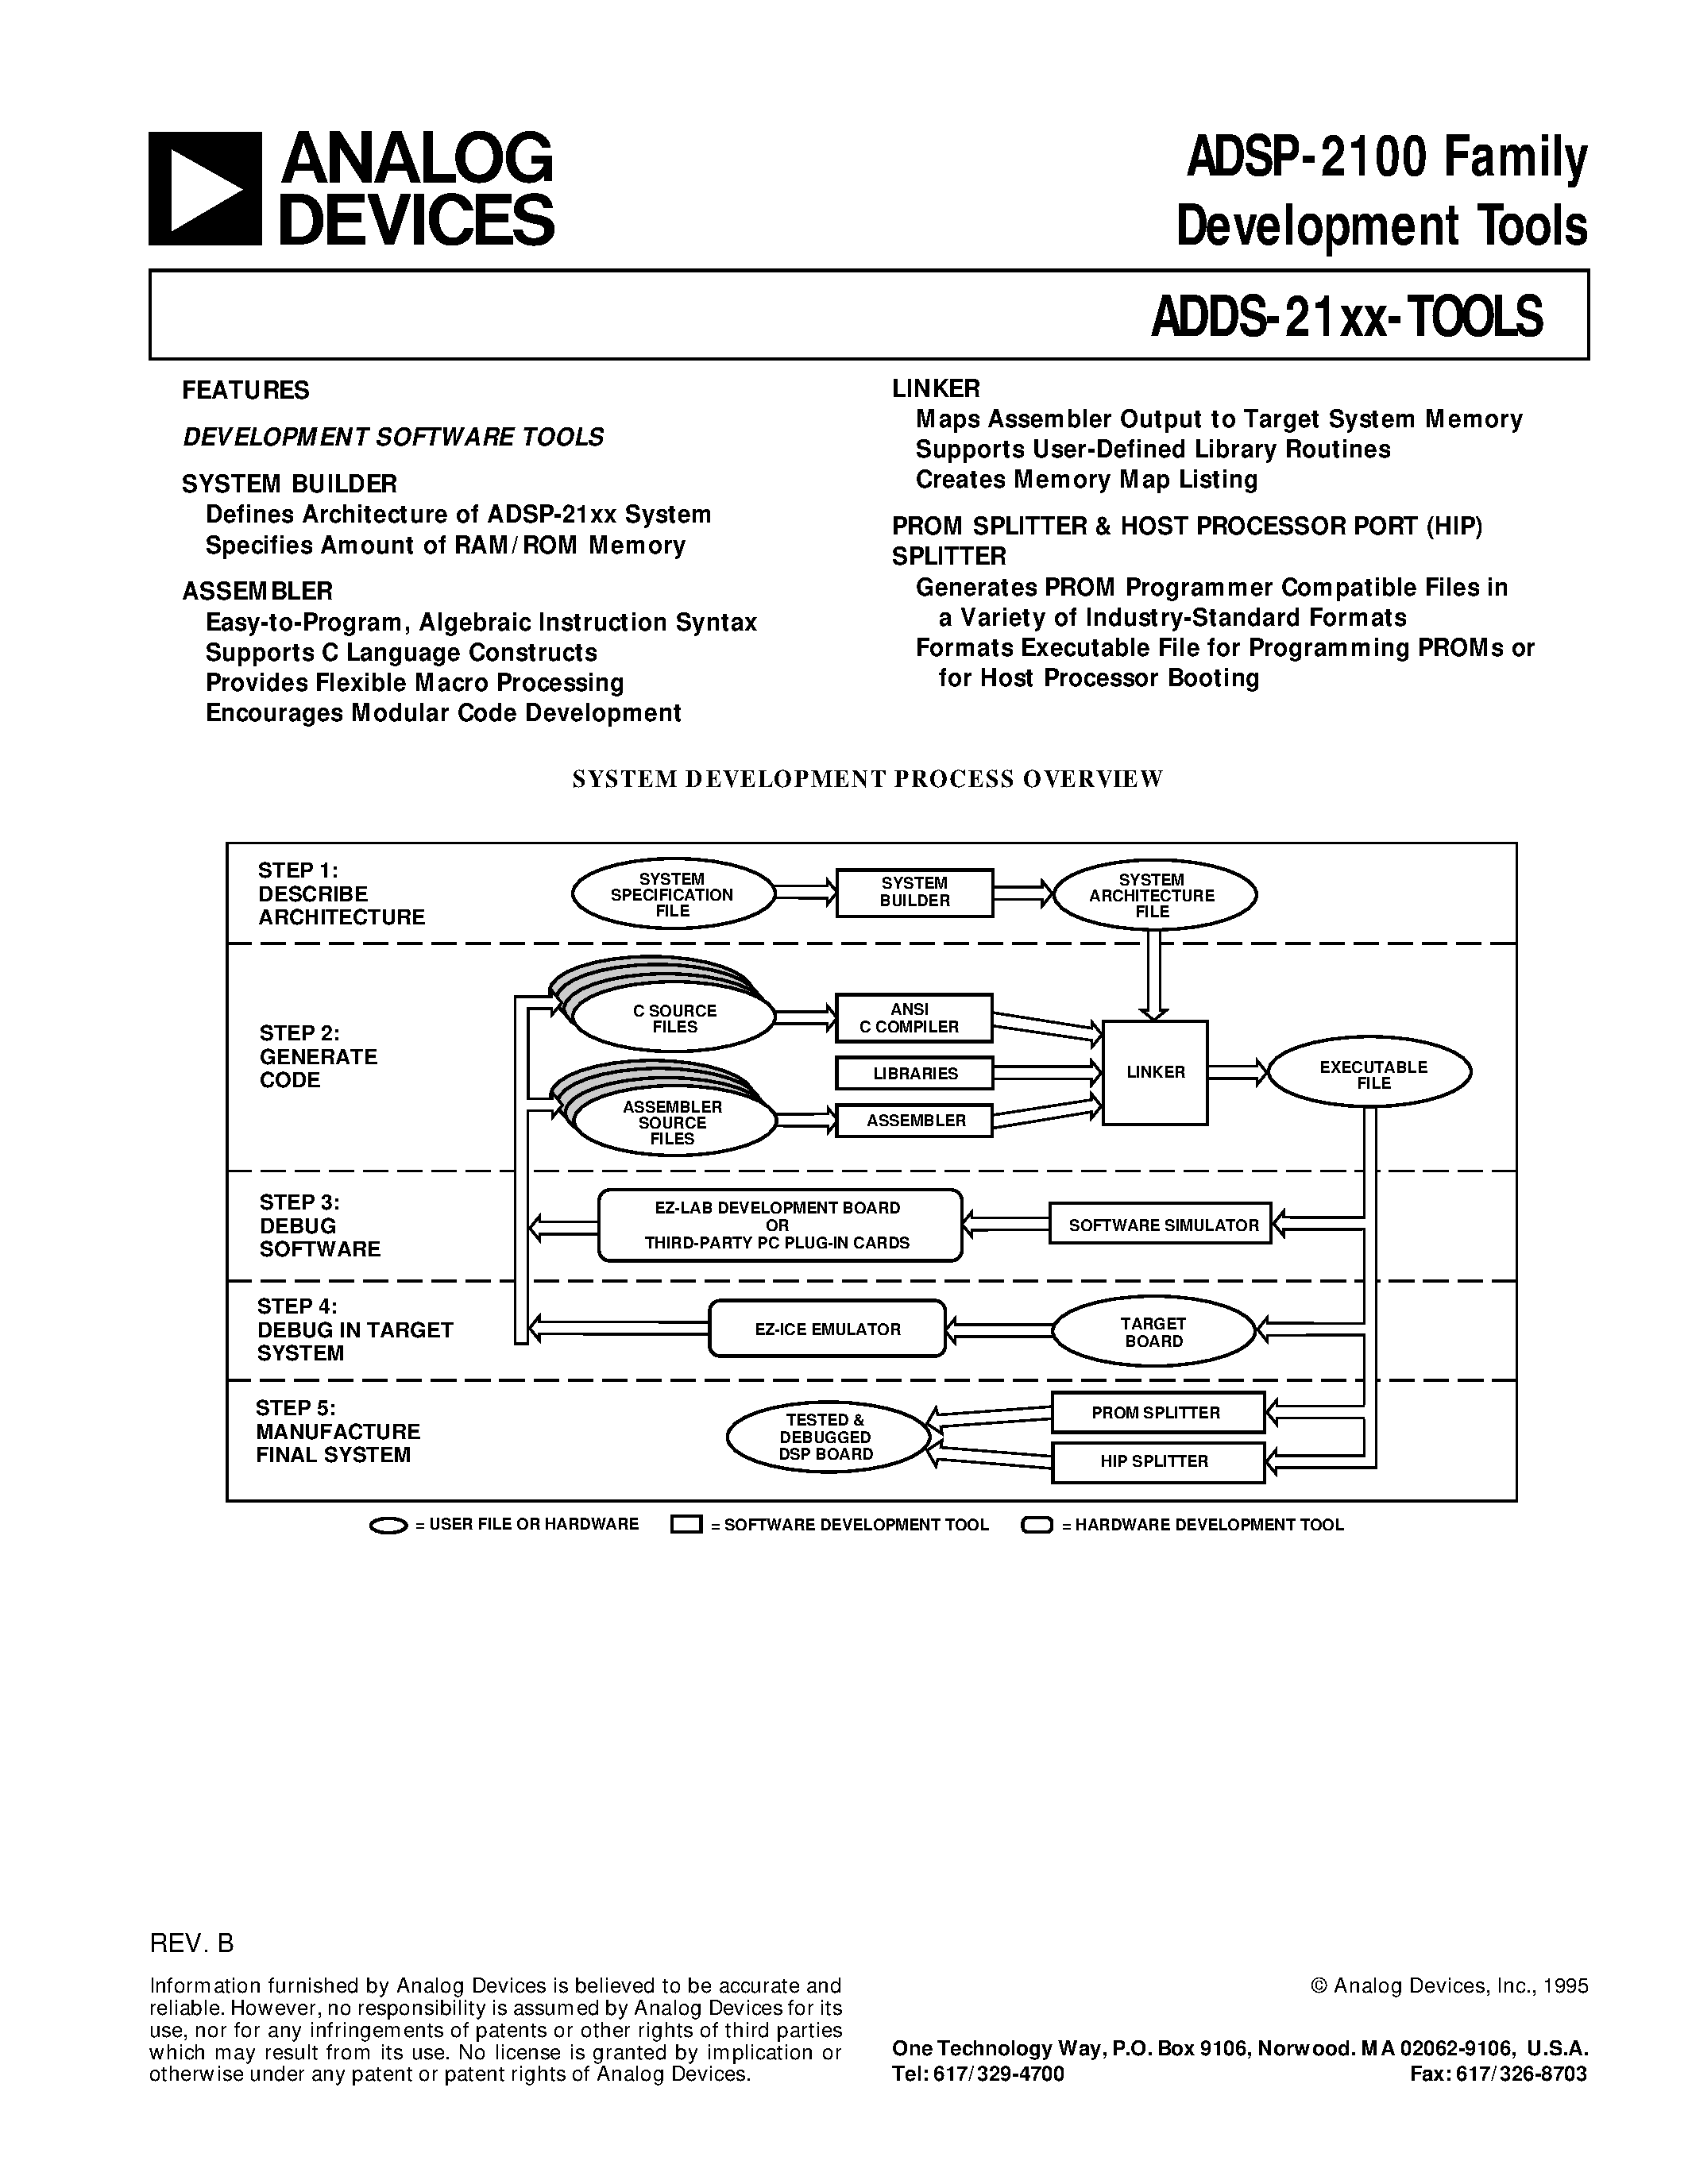 Datasheet ADDS-2171-EZ-ICE-P - ADSP-2100 Family Development Tools page 1